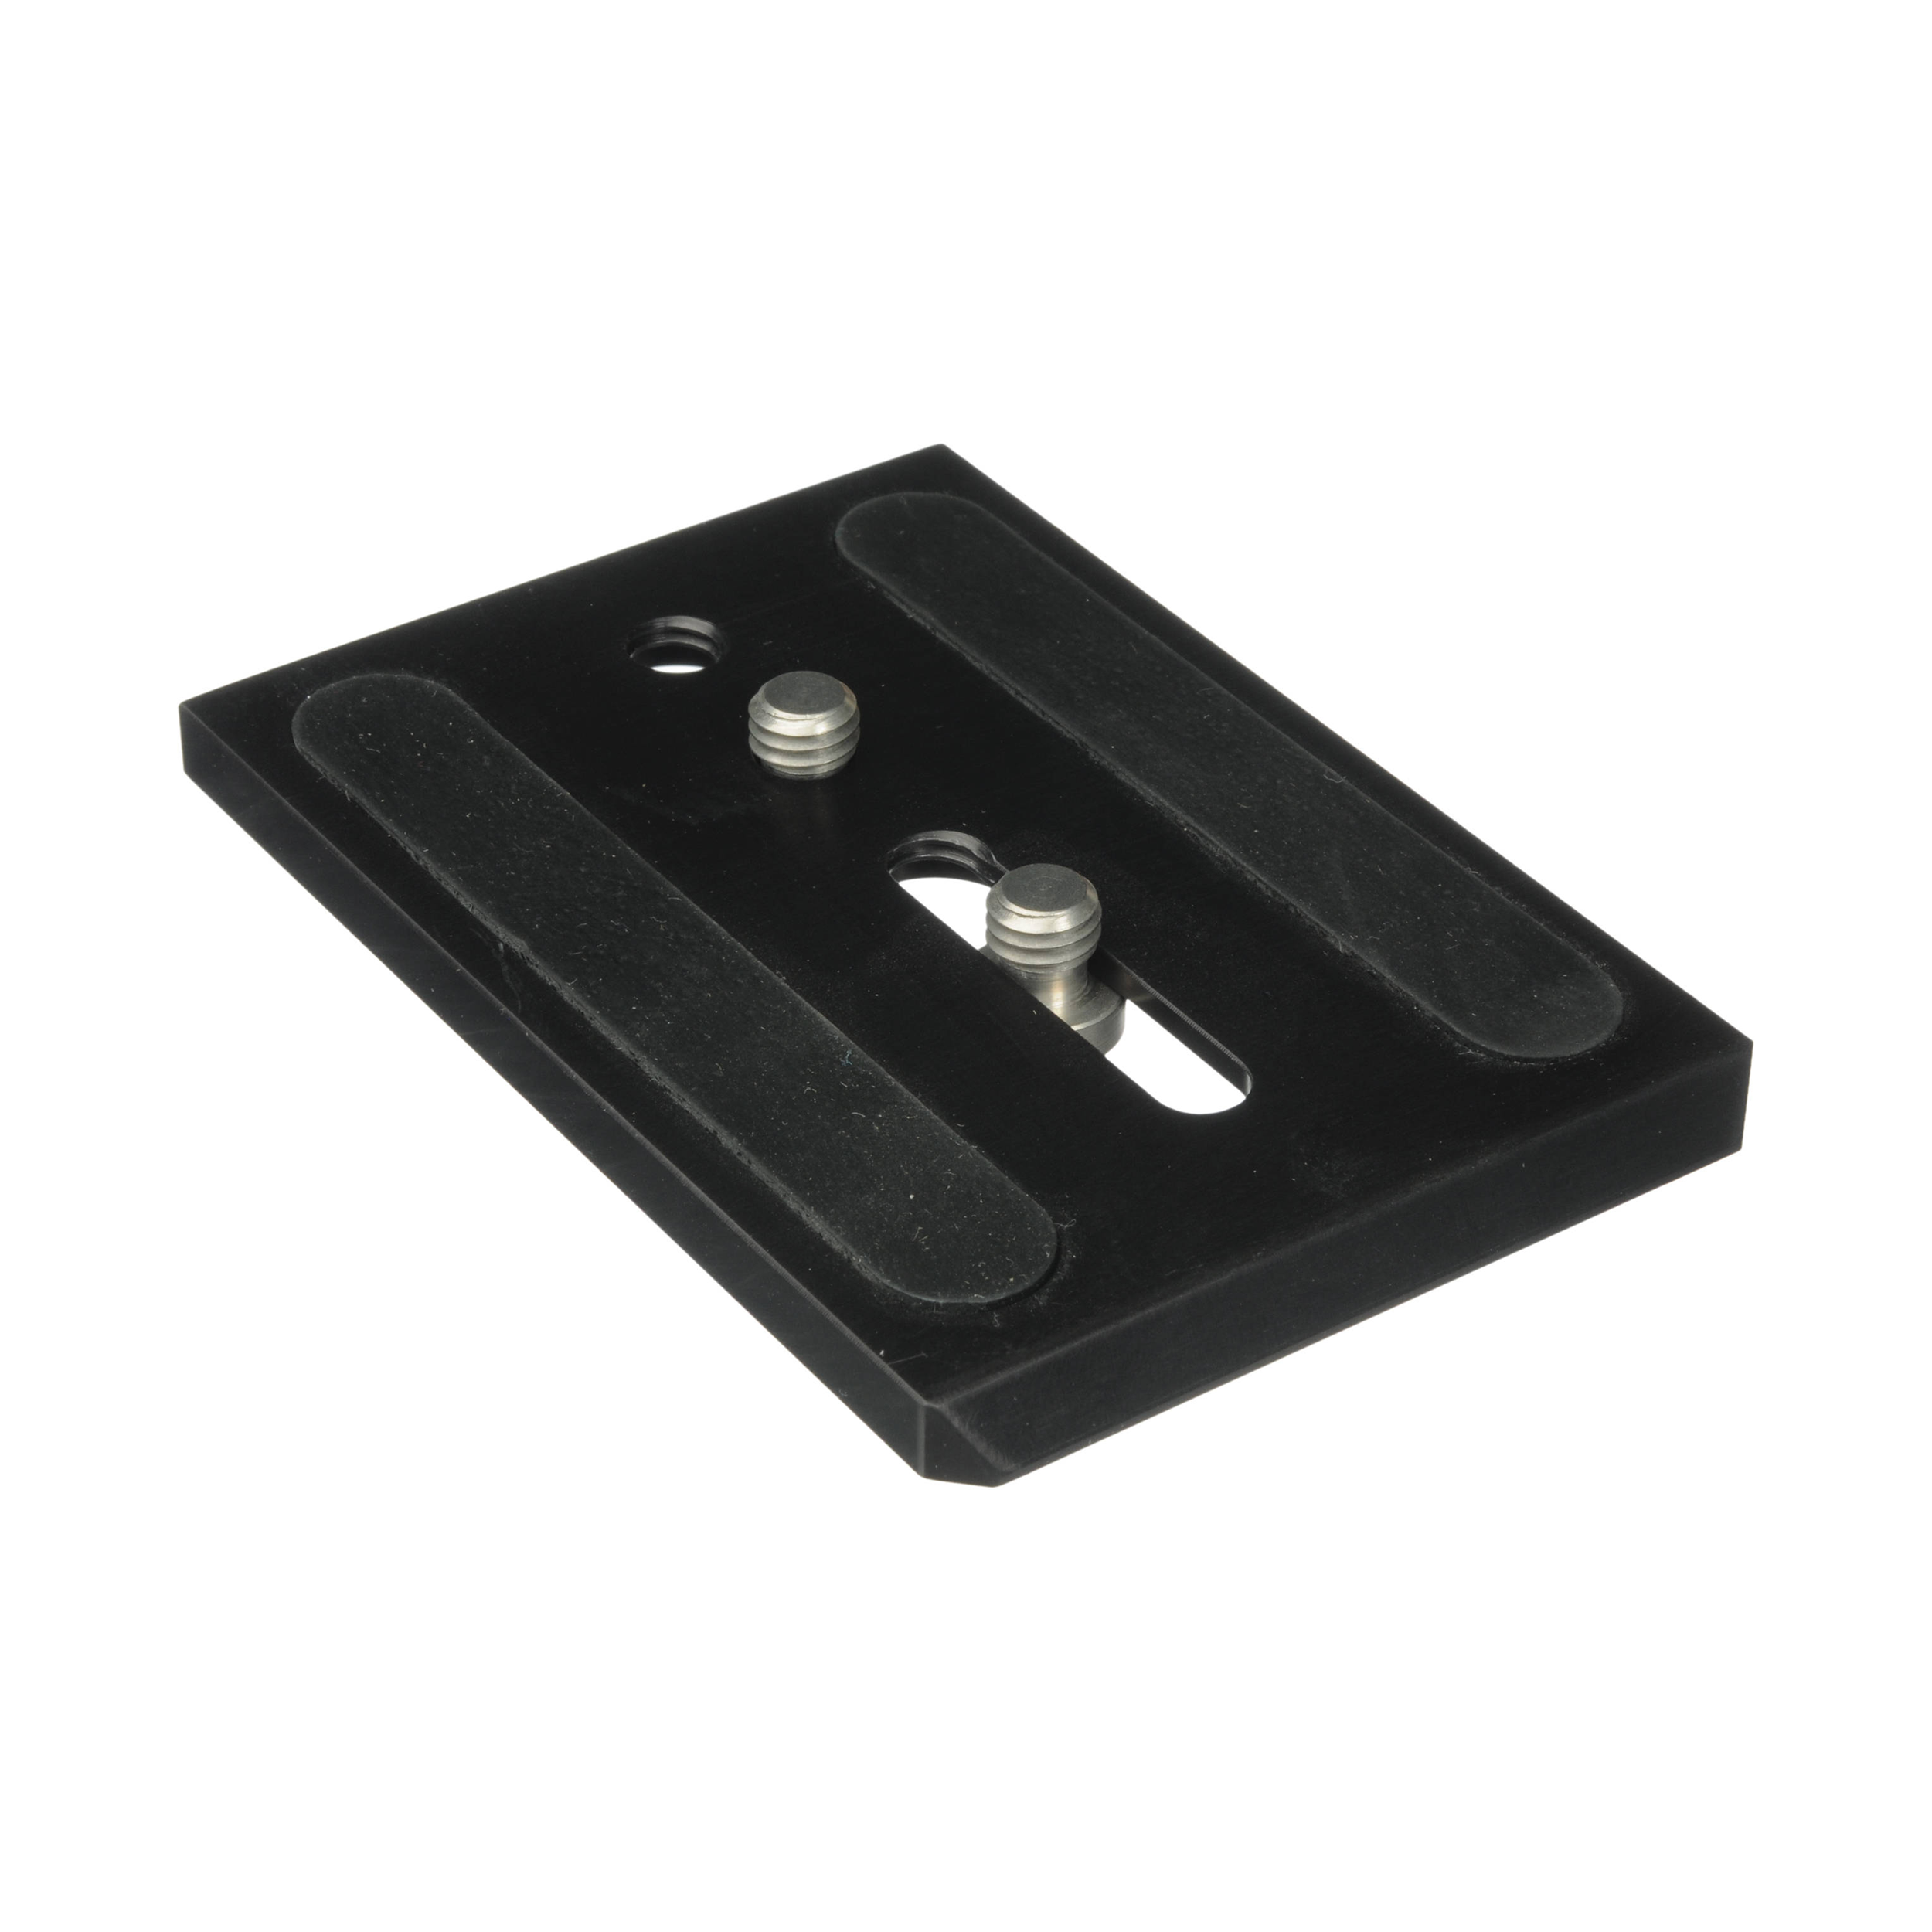 Sachtler Camera Plate 35 Touch and Go Quick Release Plate - for Select Sachtler Tripod Heads